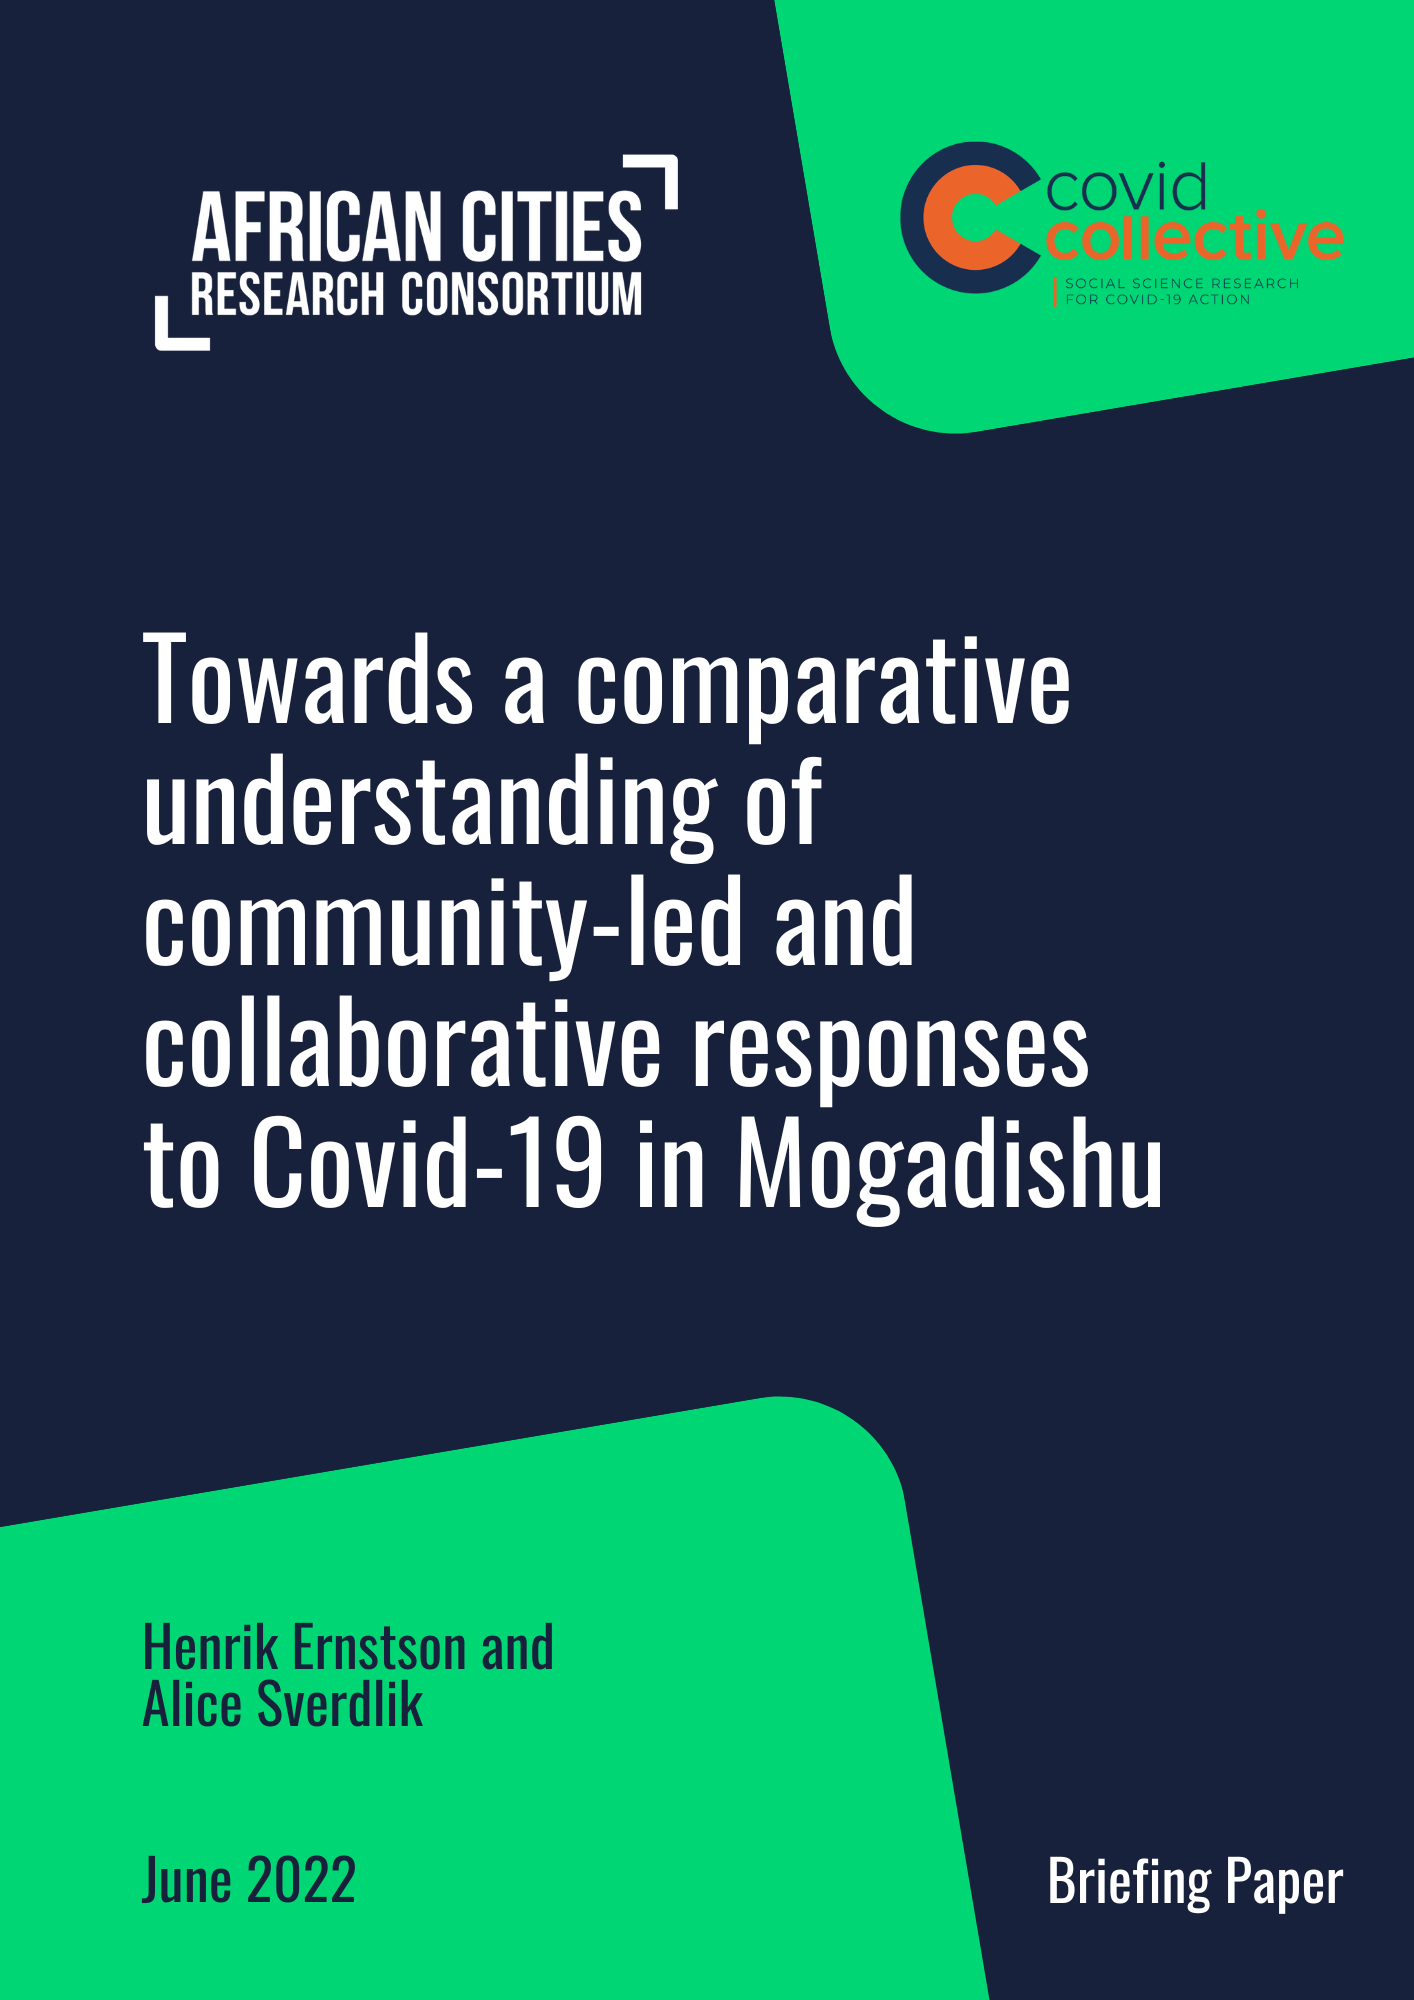 Towards a comparative understanding of community-led and collaborative responses to Covid-19 in Mogadishu